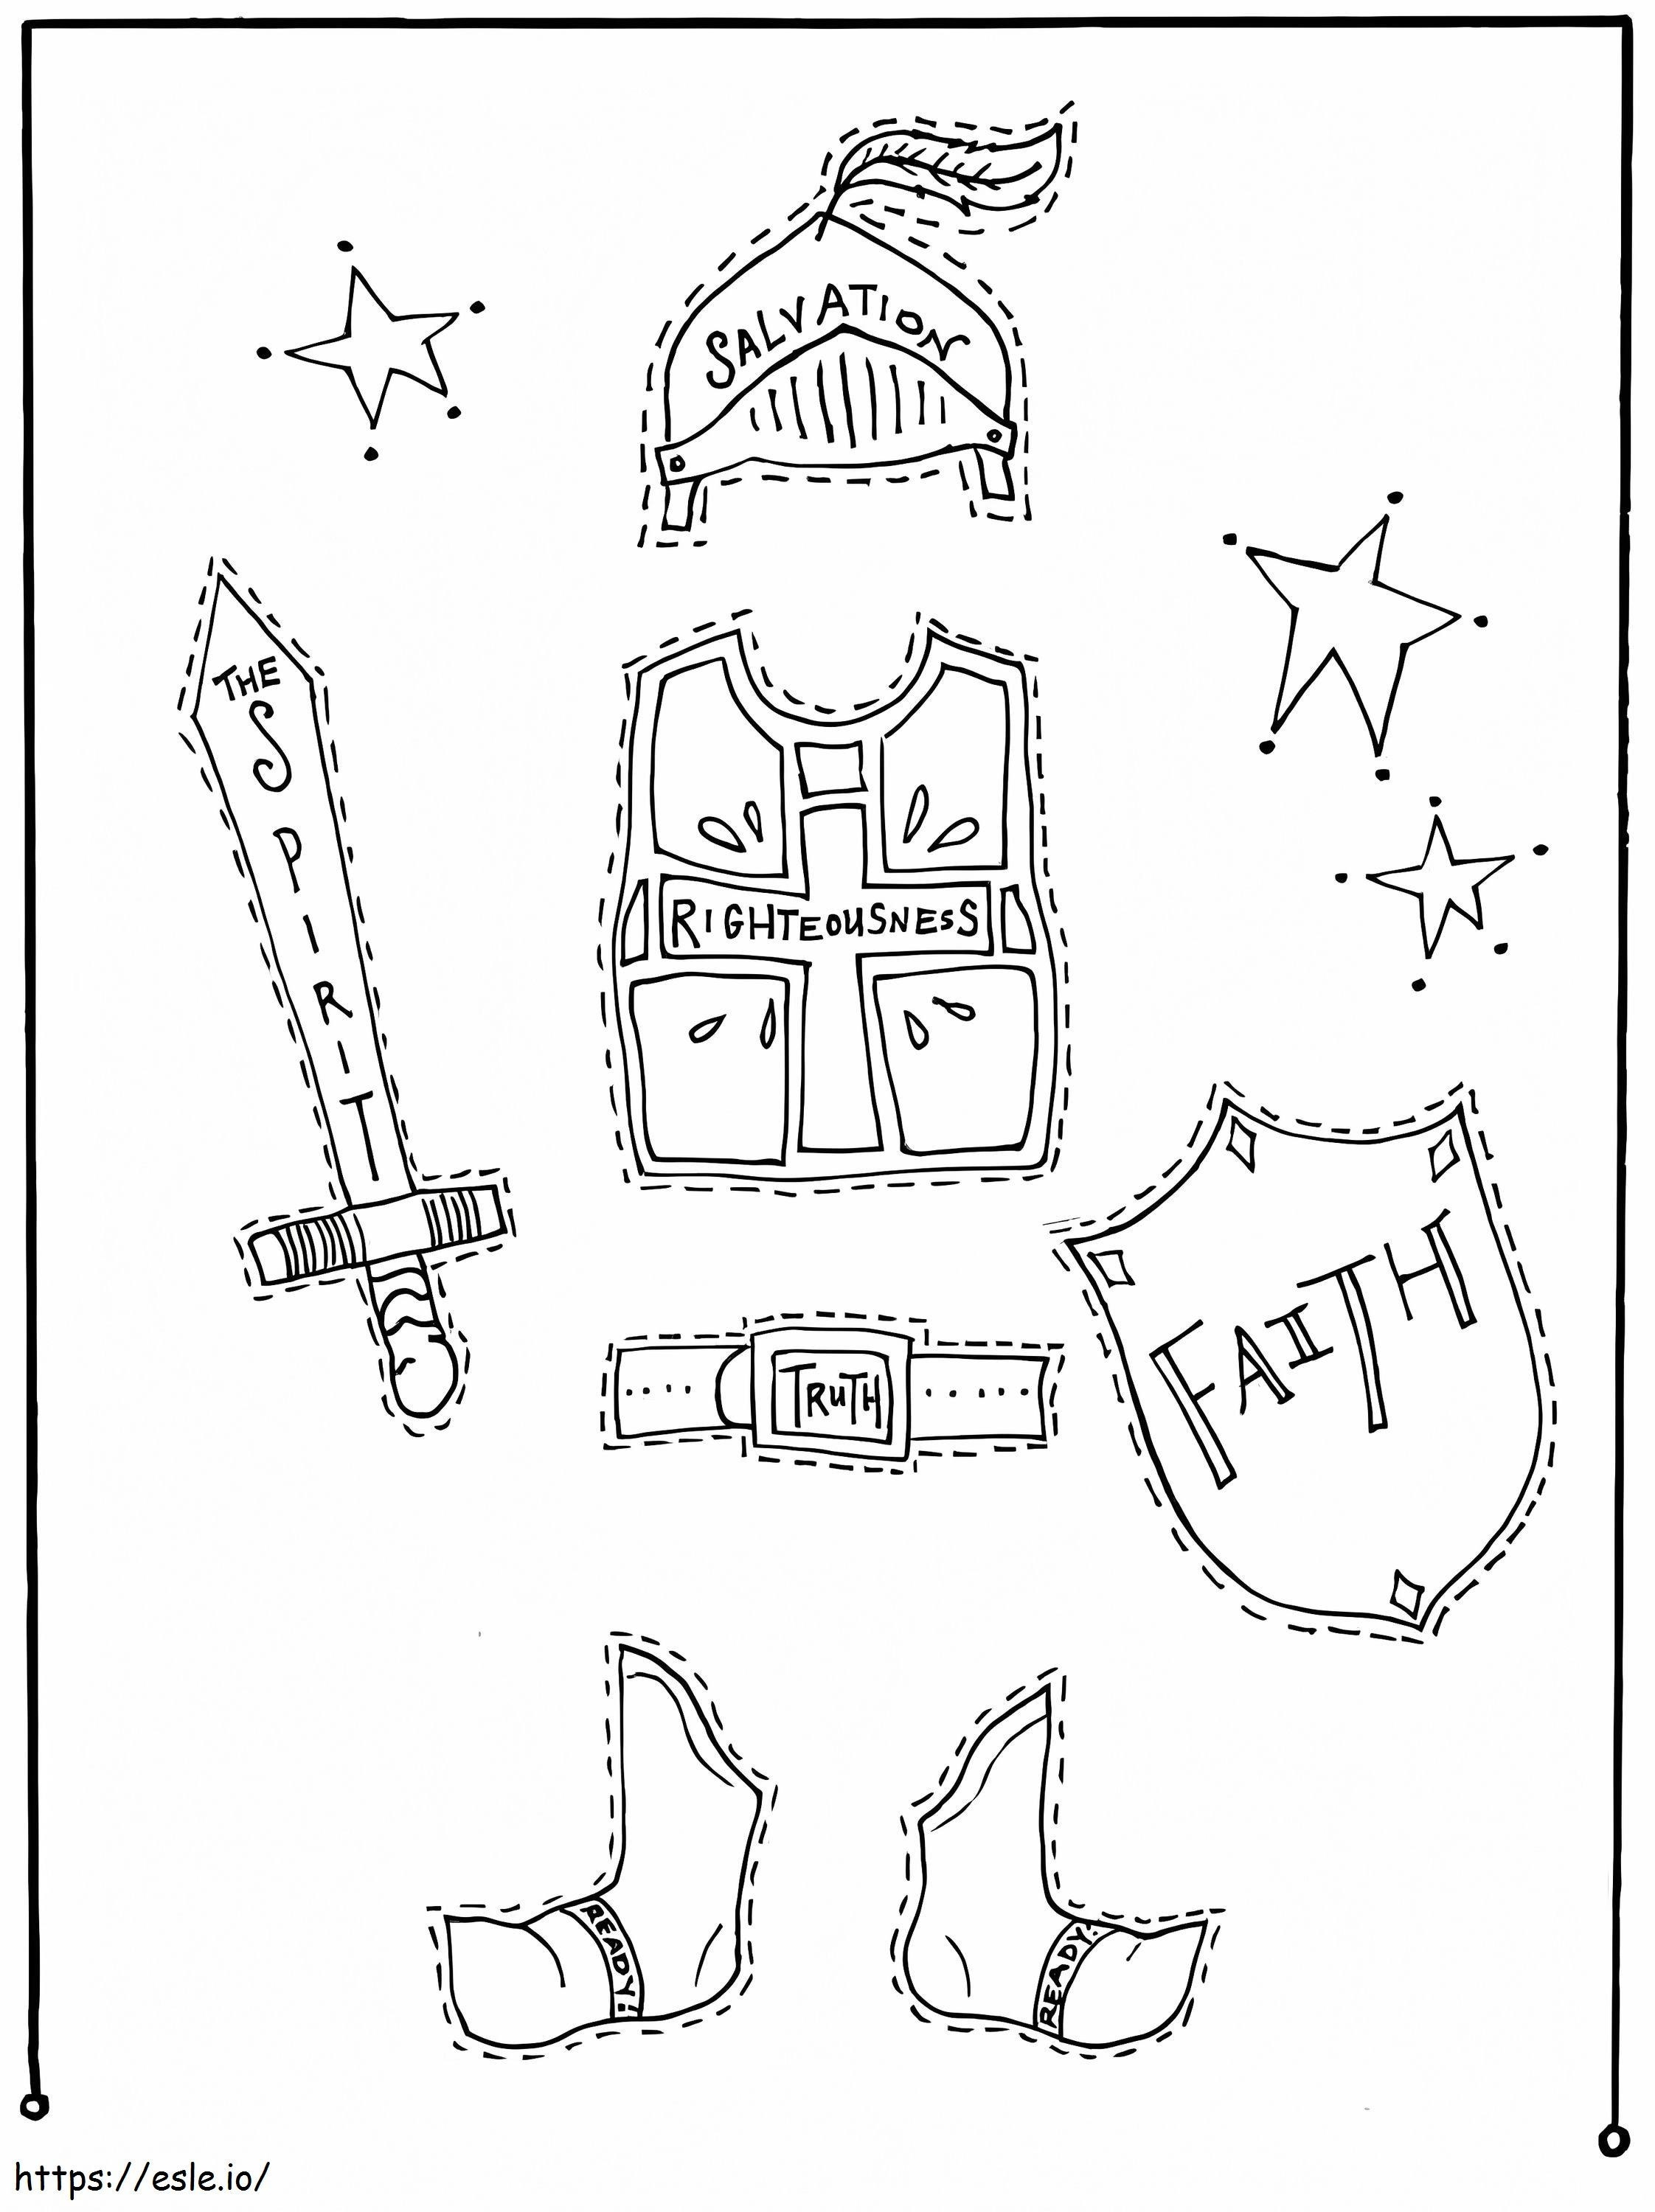 Armor Of God 2 coloring page